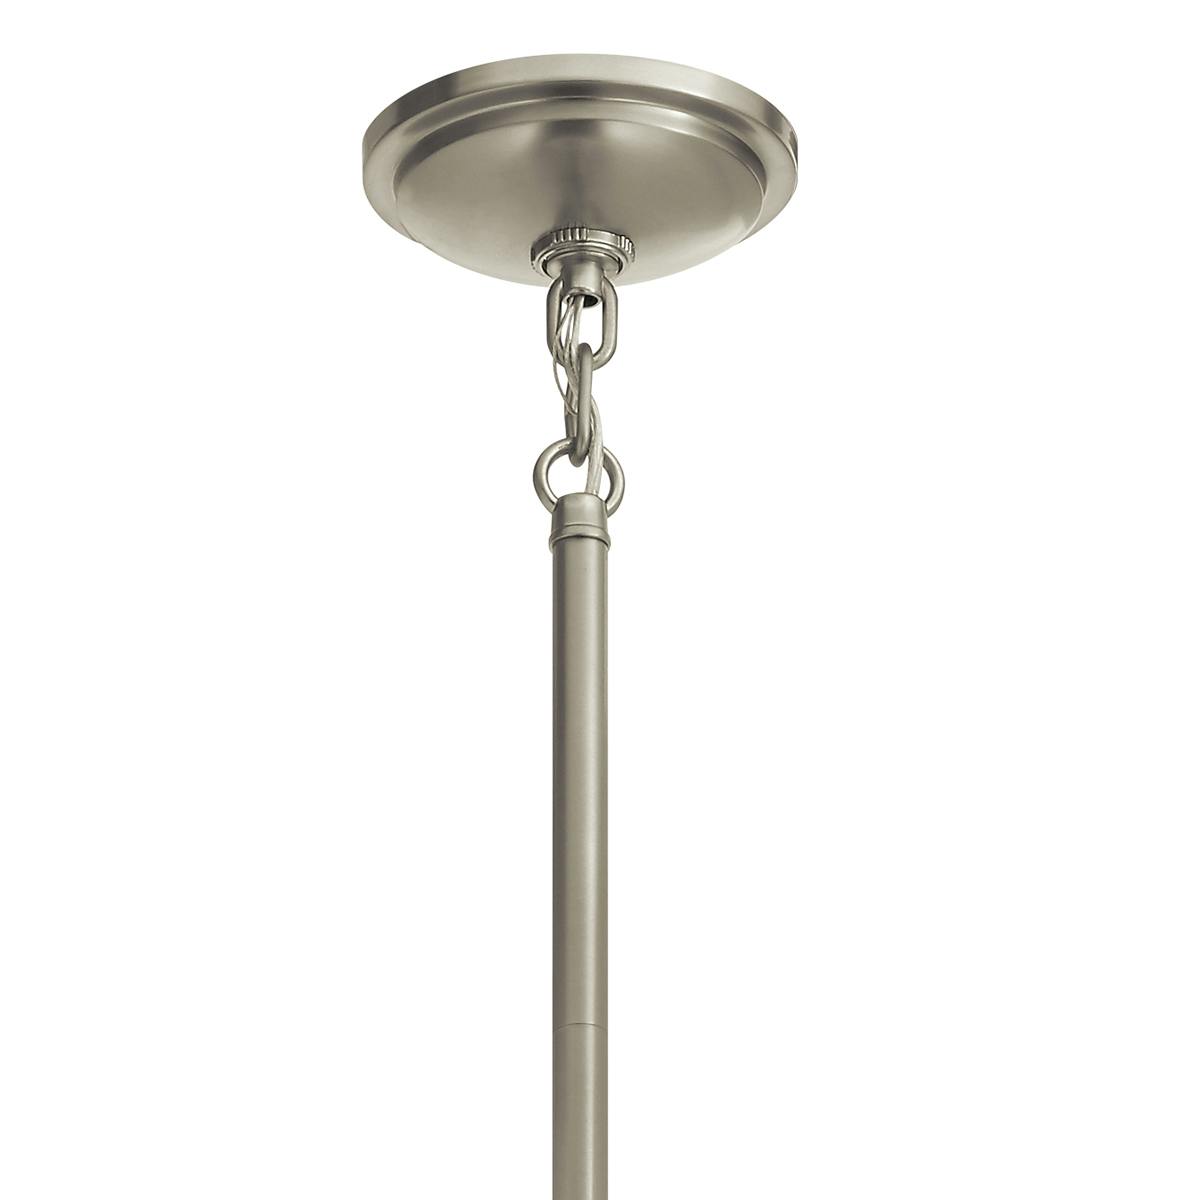 Canopy for the Tollis 23.75" Foyer Pendant Nickel on a white background